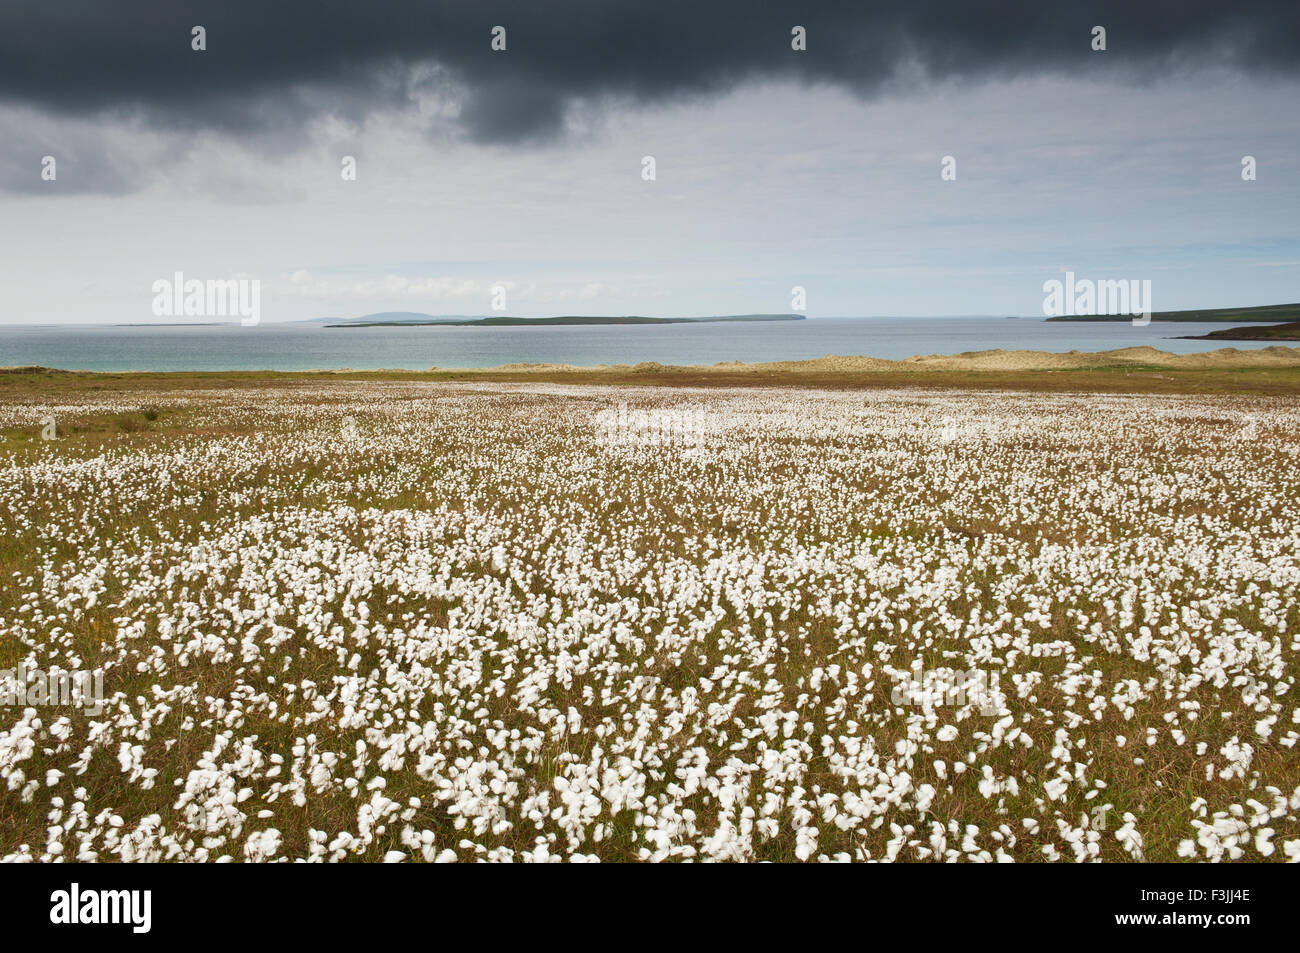 Moorland with bog cotton in flower on the island of Eday, Orkney Islands, Scotland. Stock Photo